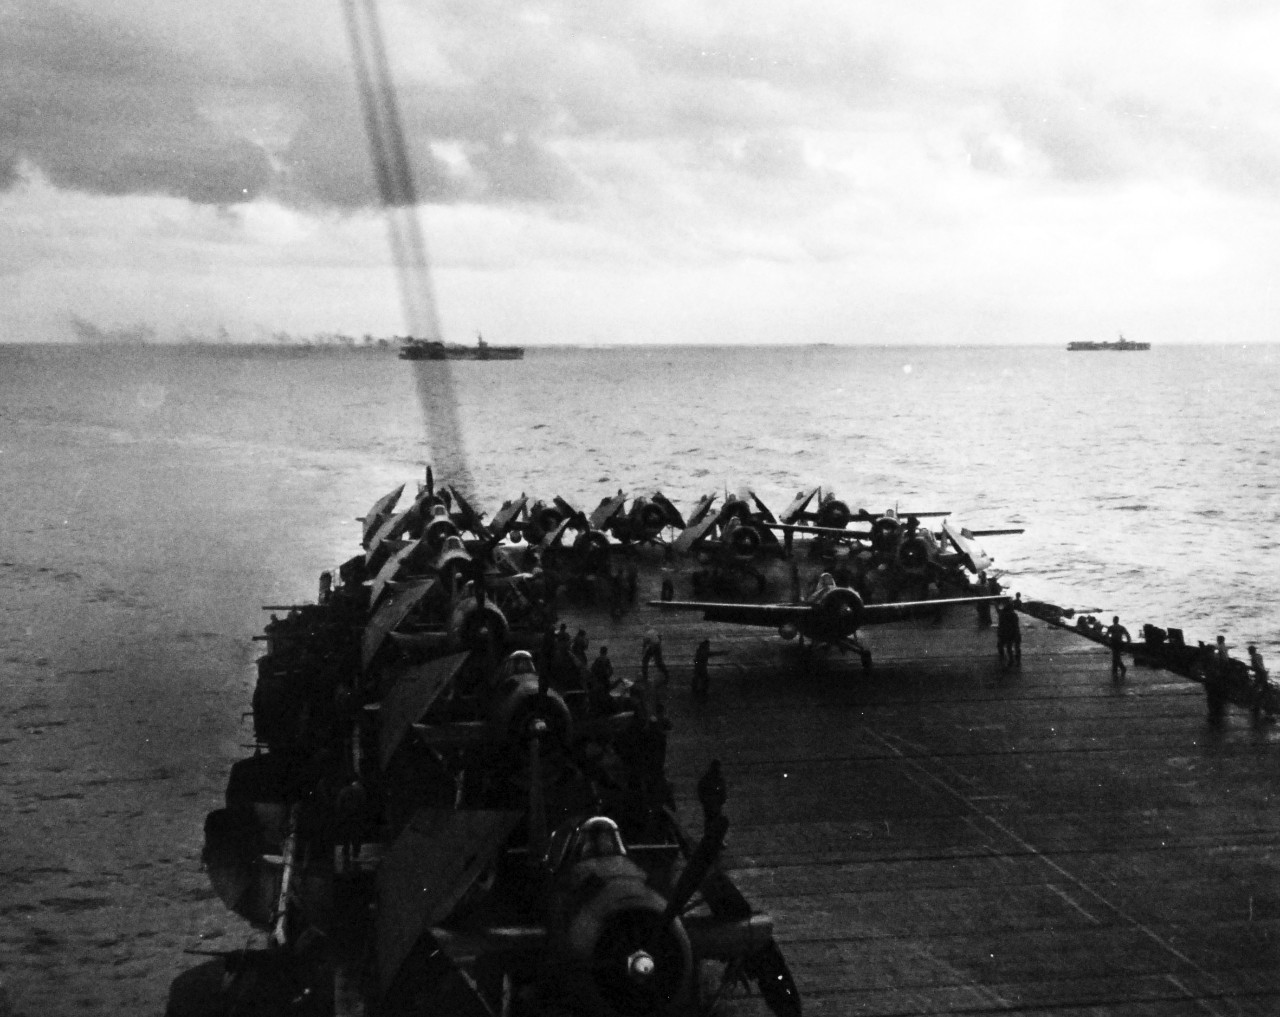 80-G-287425:   Battle off Samar, October 25, 1944.   USS Kitkun Bay (CVE 71) launches “Avengers” to engage Japanese fleet during the Battle of Leyte Gulf.  Official U.S. Navy Photograph, now in the collections of the National Archives.   (2014/5/15).  